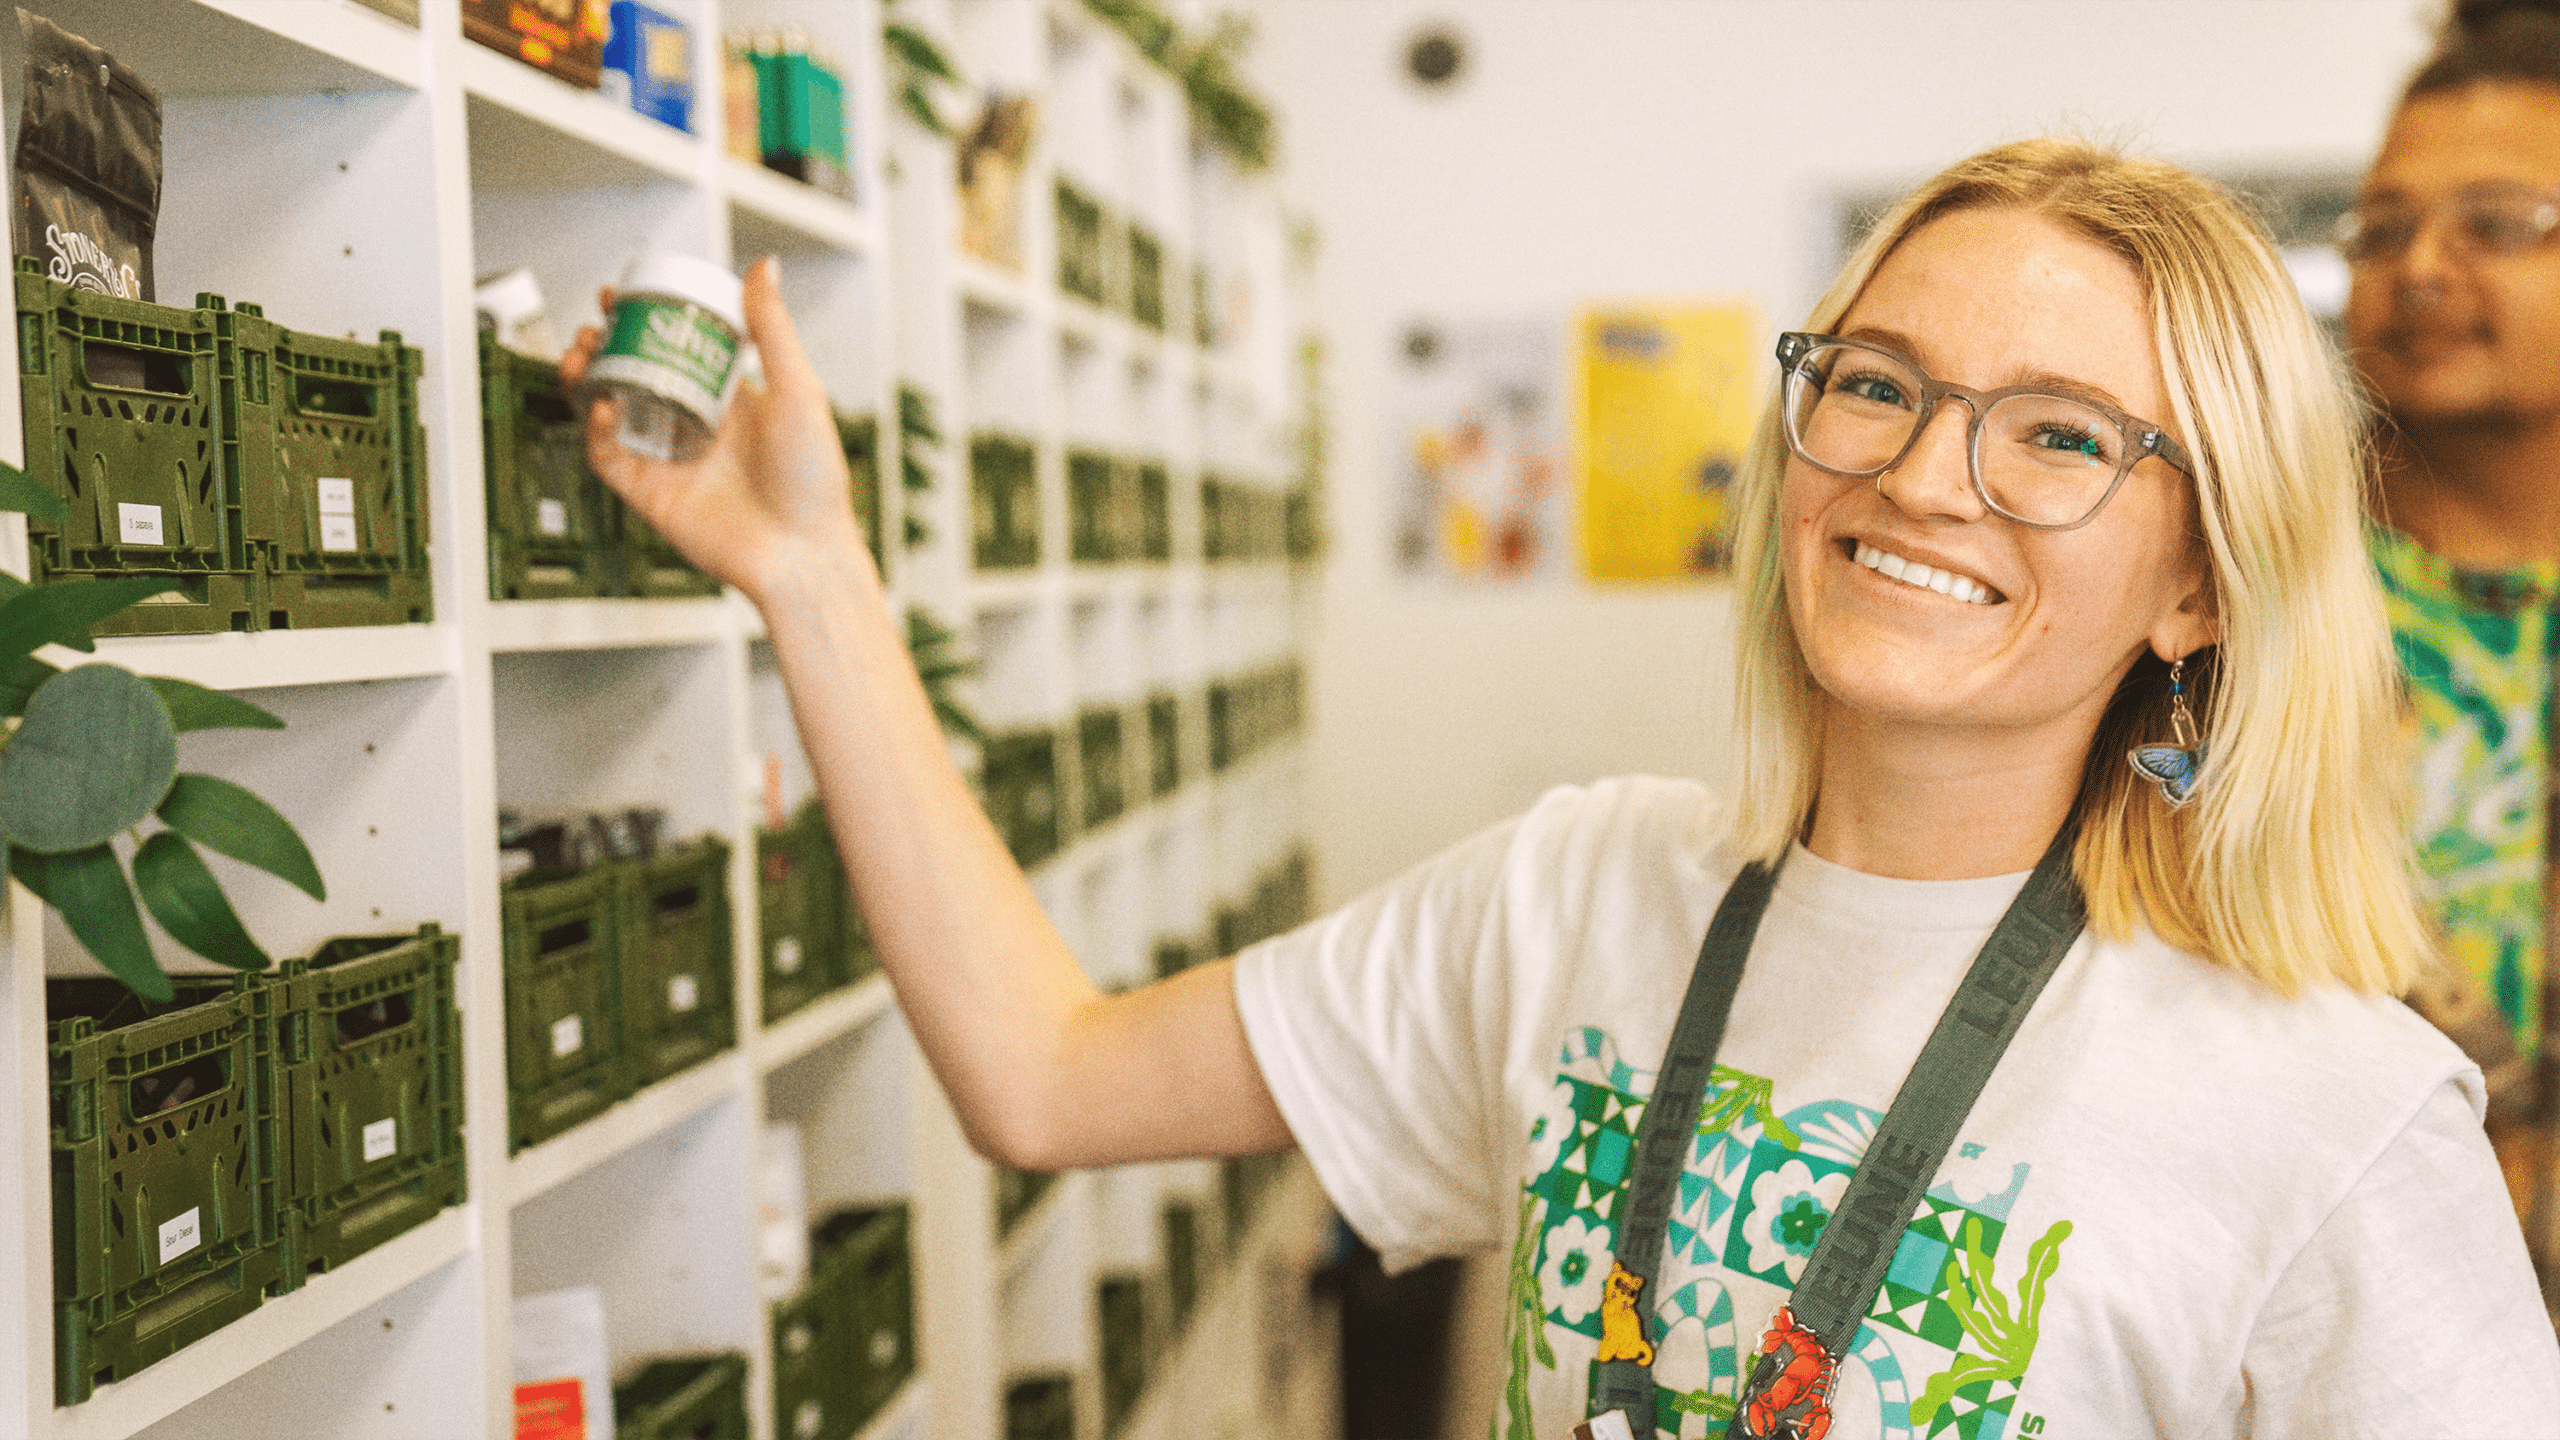 image of budtender smiling and ready to help